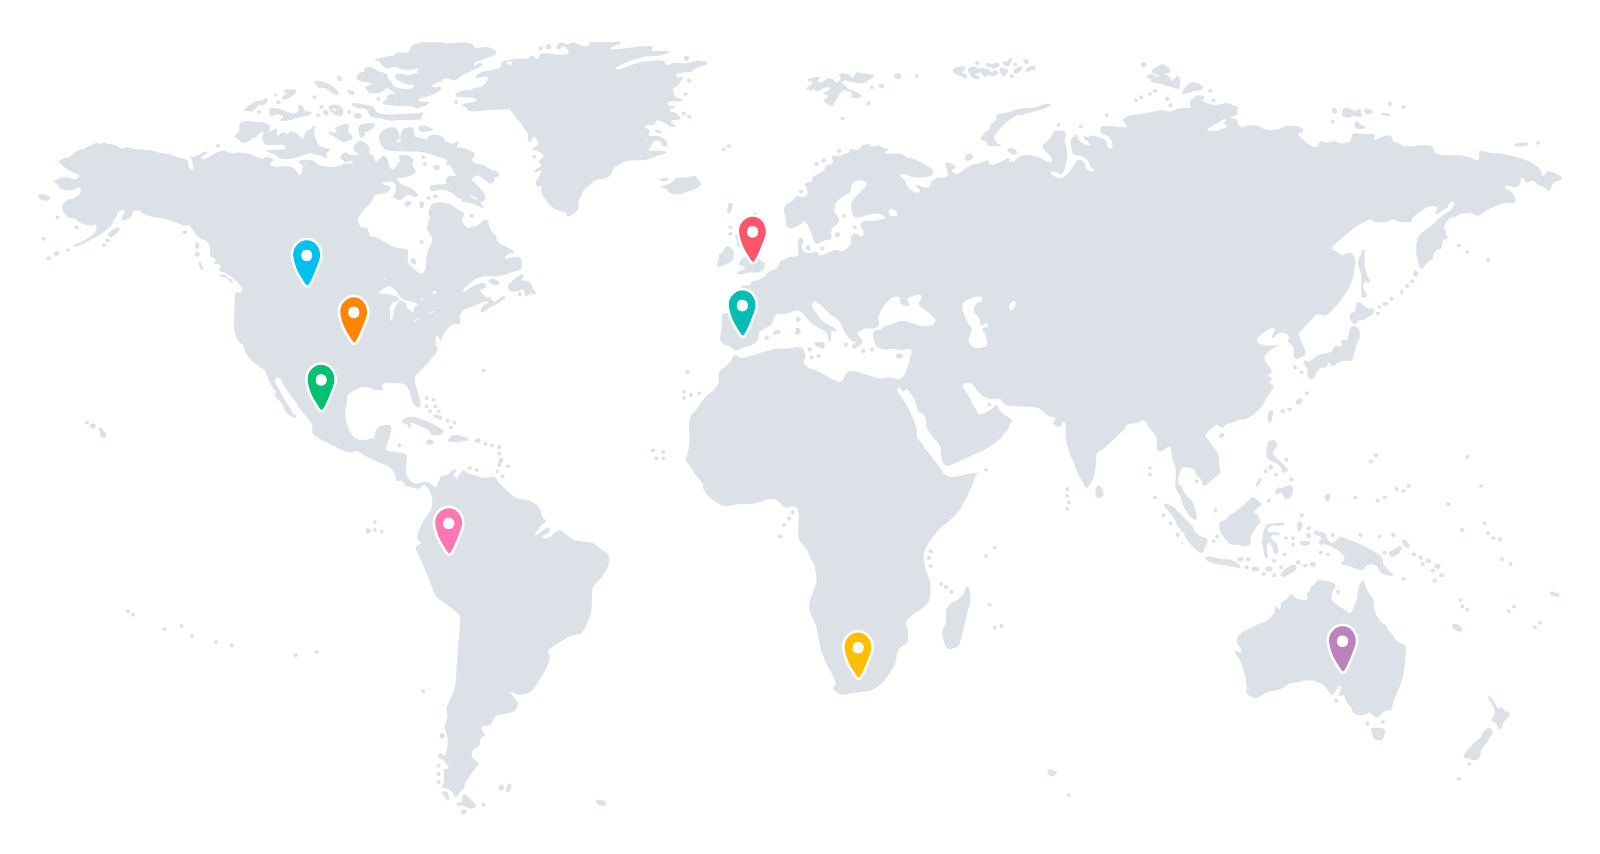 Pin drops of Field Agent locations on a world map.